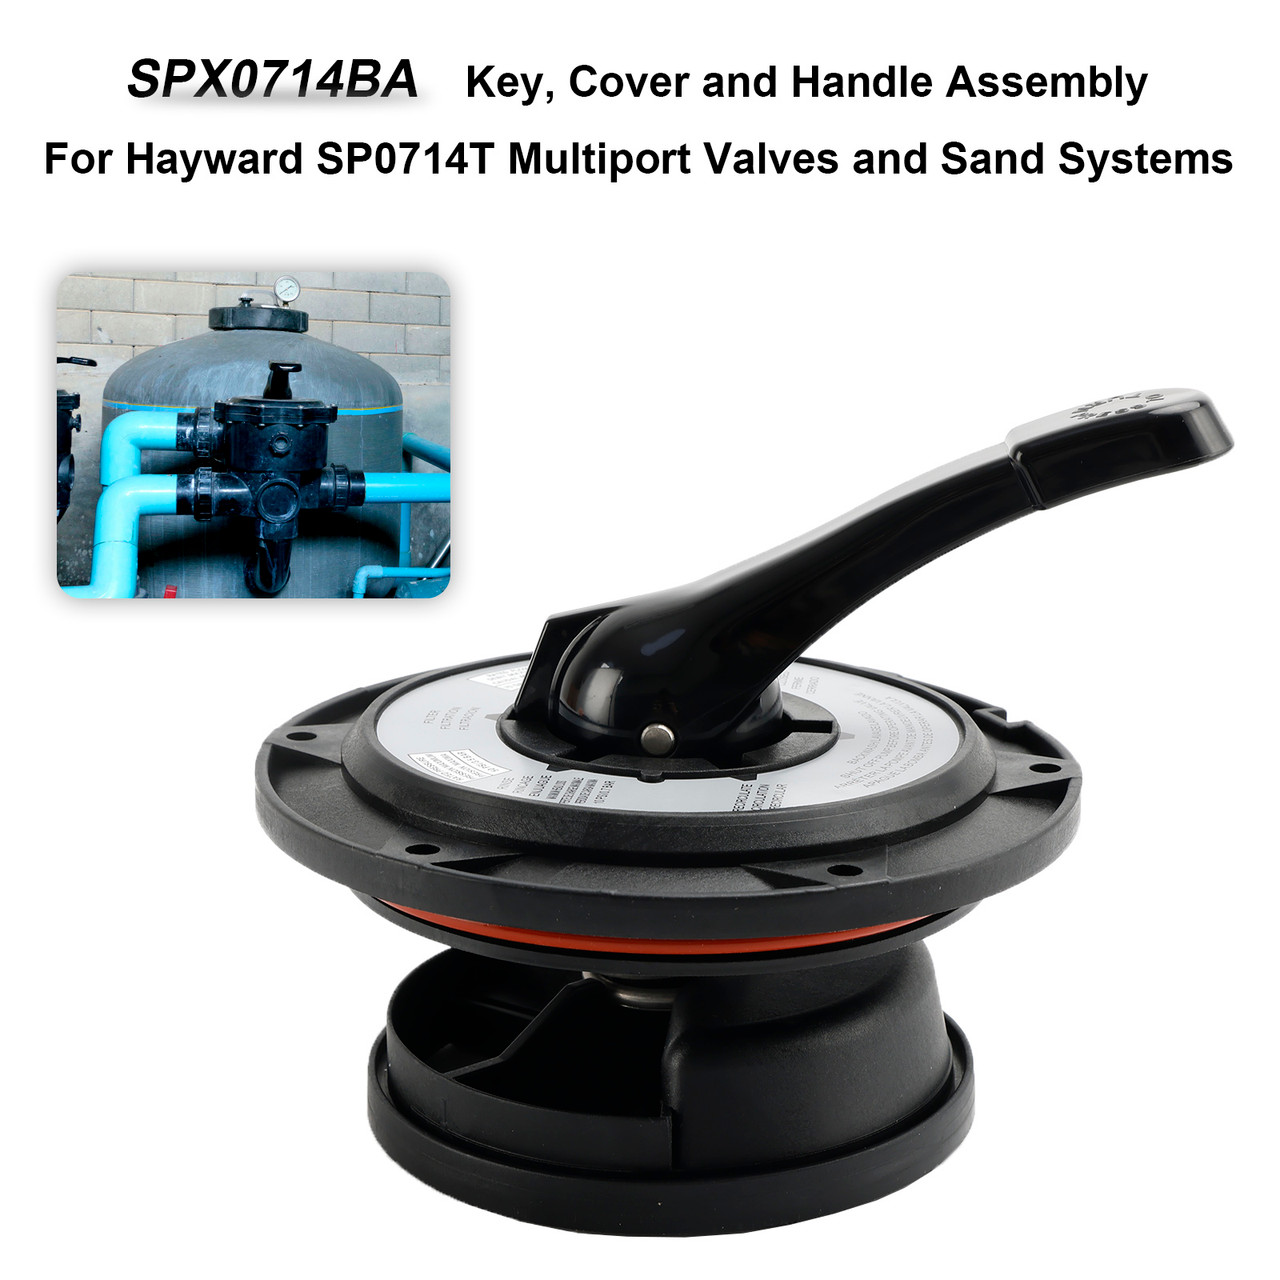 Valve Cover Assembly SPX0714BA For Hayward SP0714T Multiport Valves Sand Systems